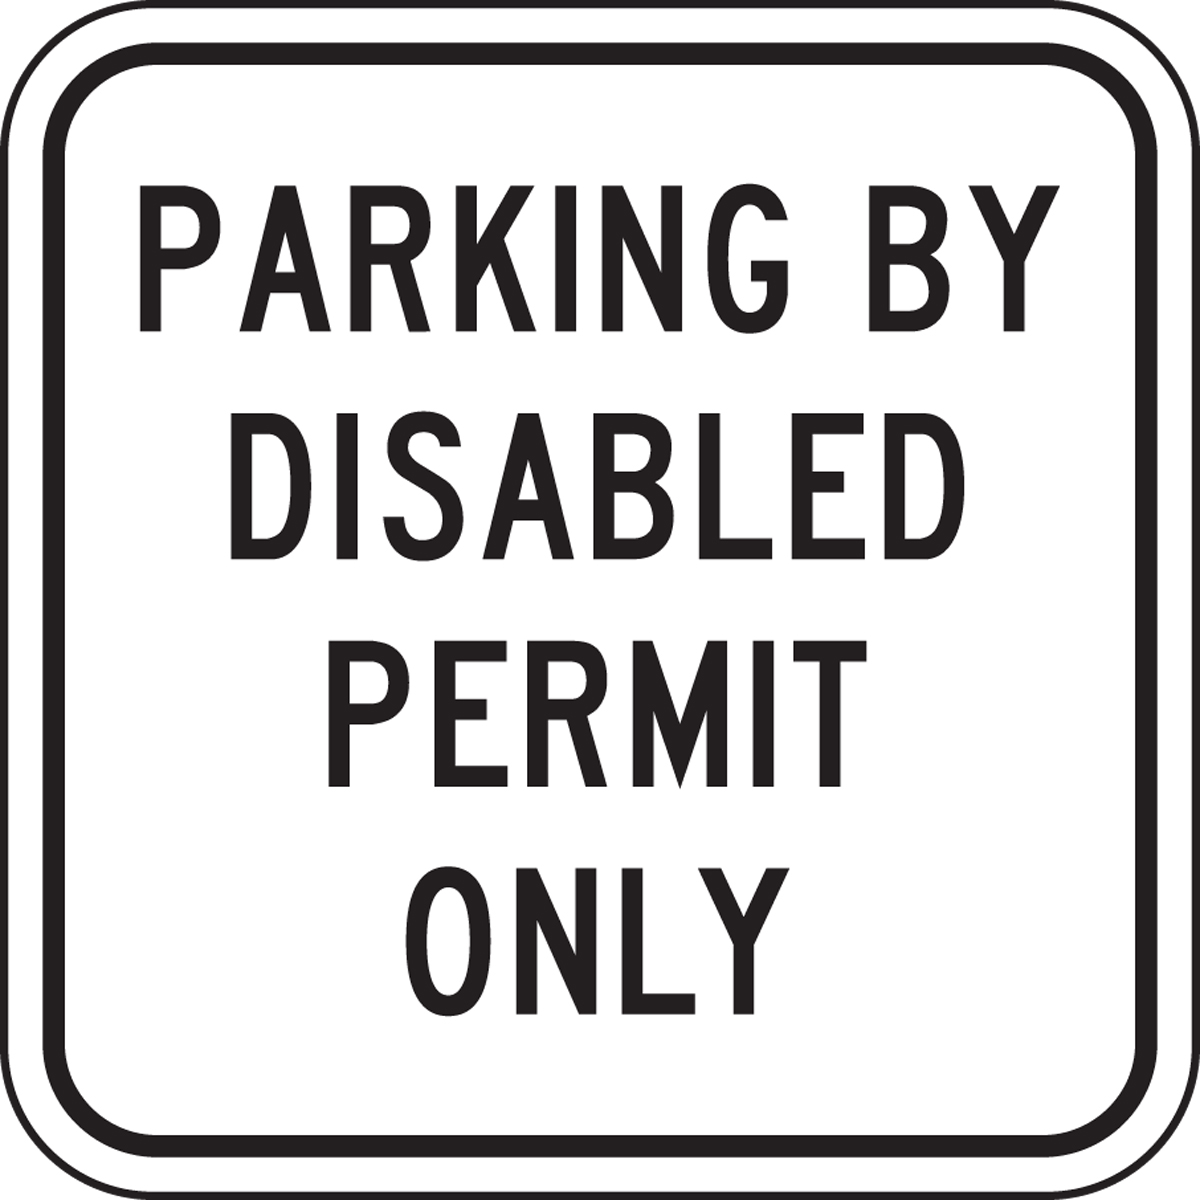 (FLORIDA) PARKING BY DISABLE PERMIT ONLY